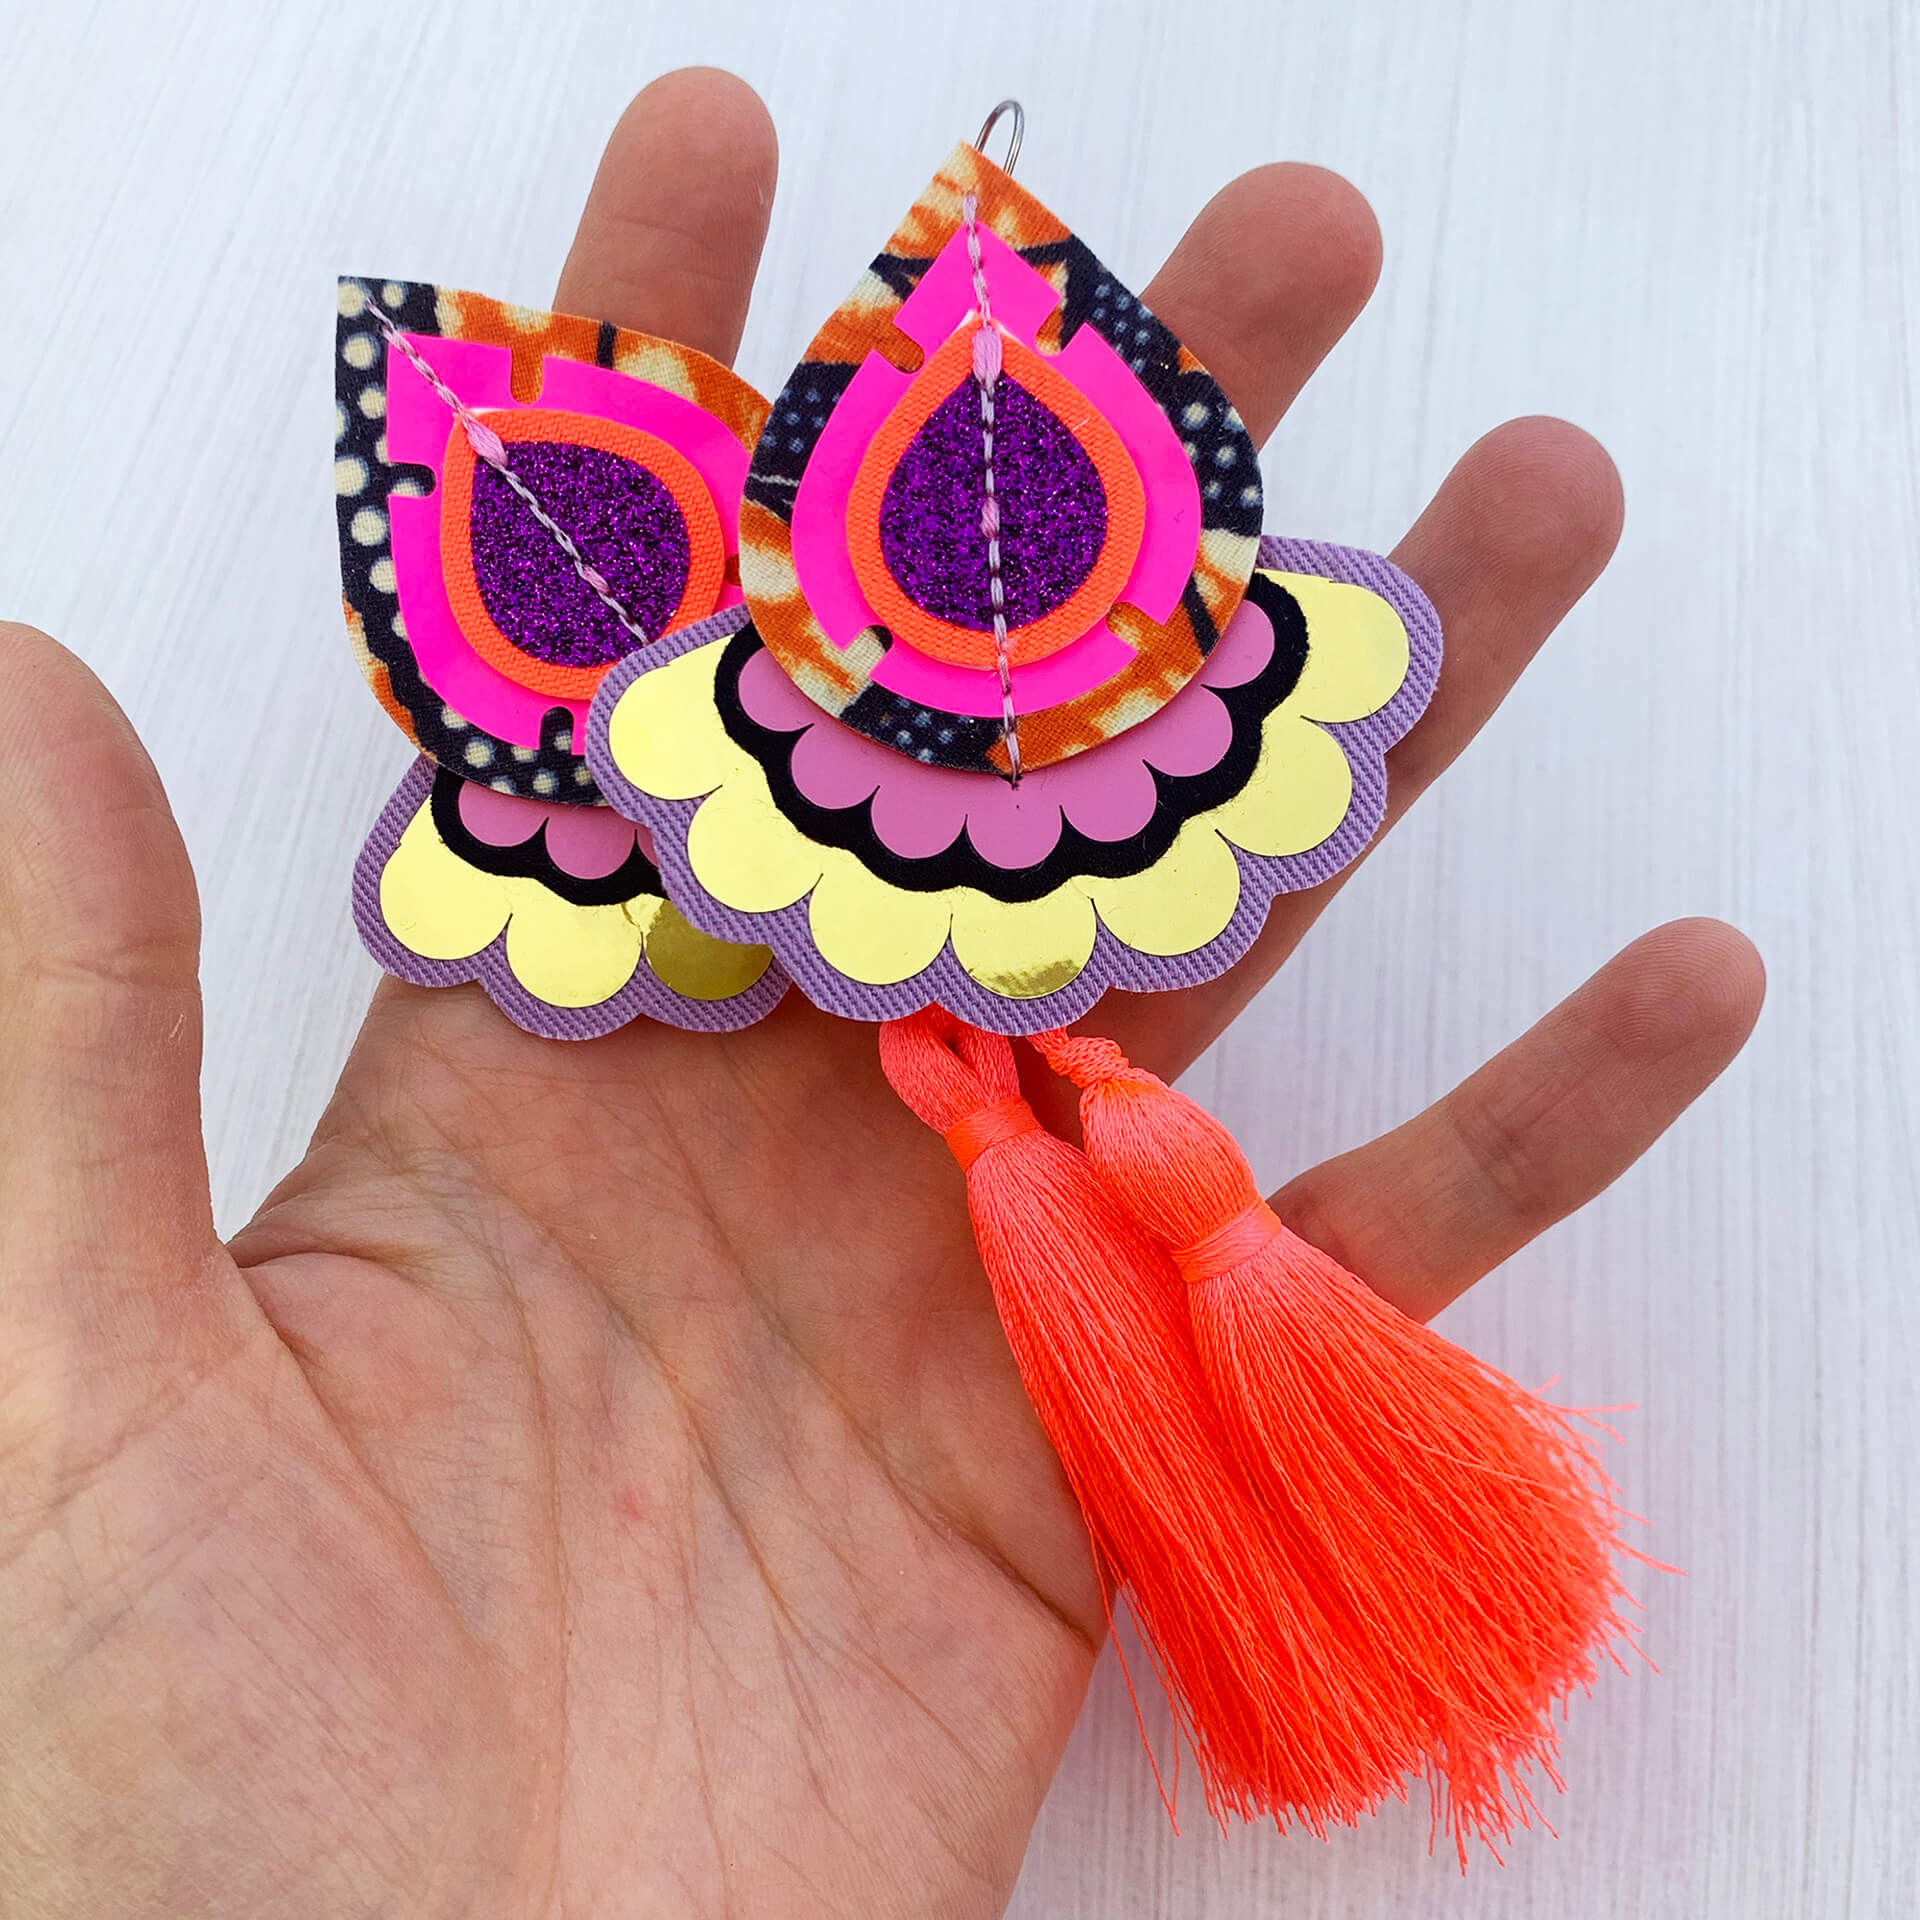 A pair of colourful decorative teardrop shaped earrings with neon coral silky tassels are held in a woman's open hand against an off white background